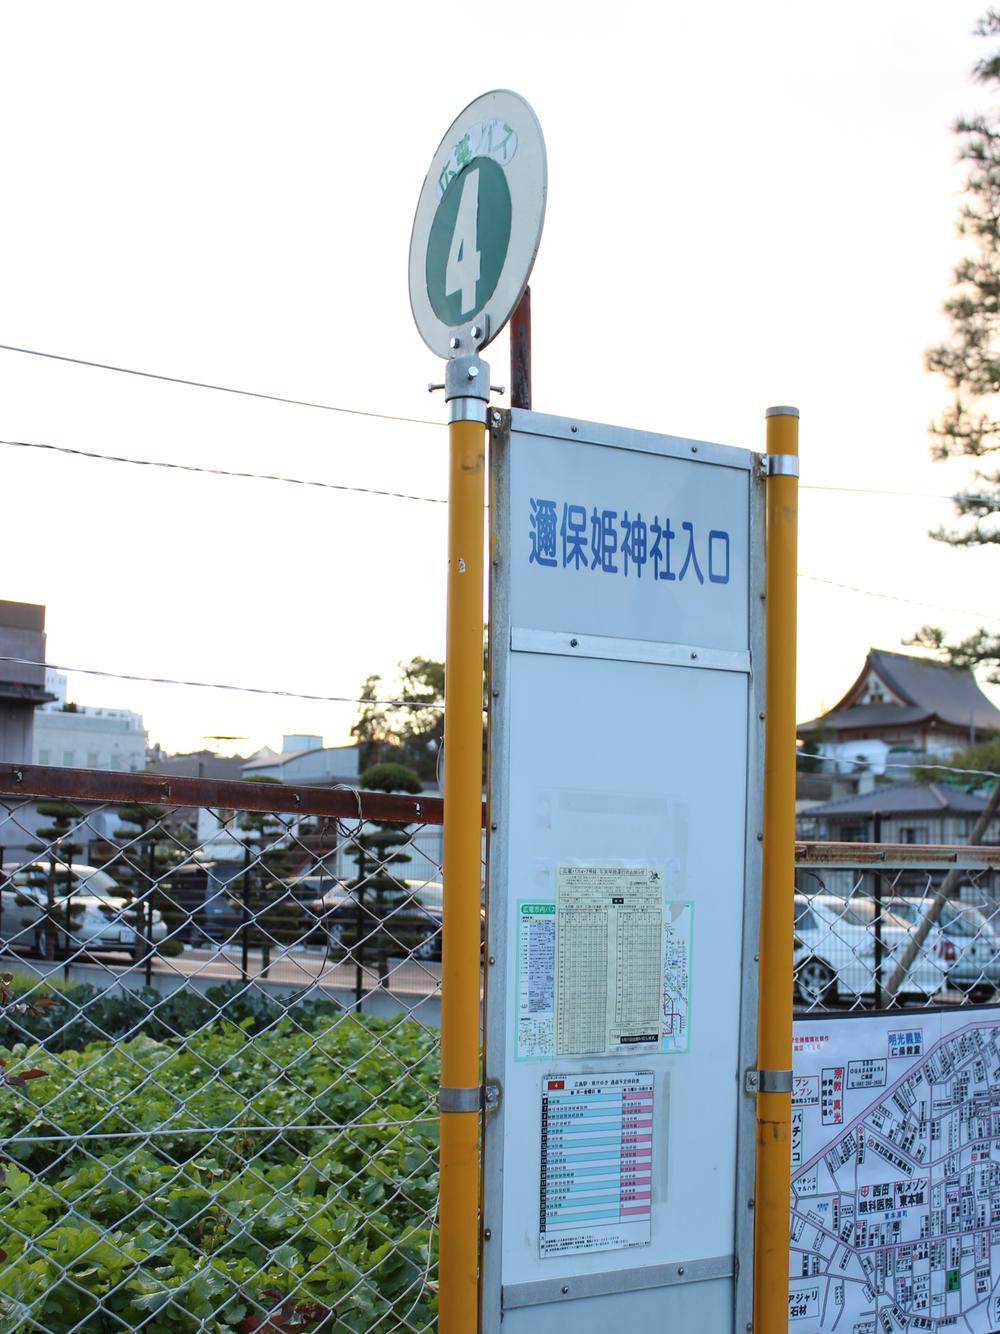 Other. 3-minute walk bus stop